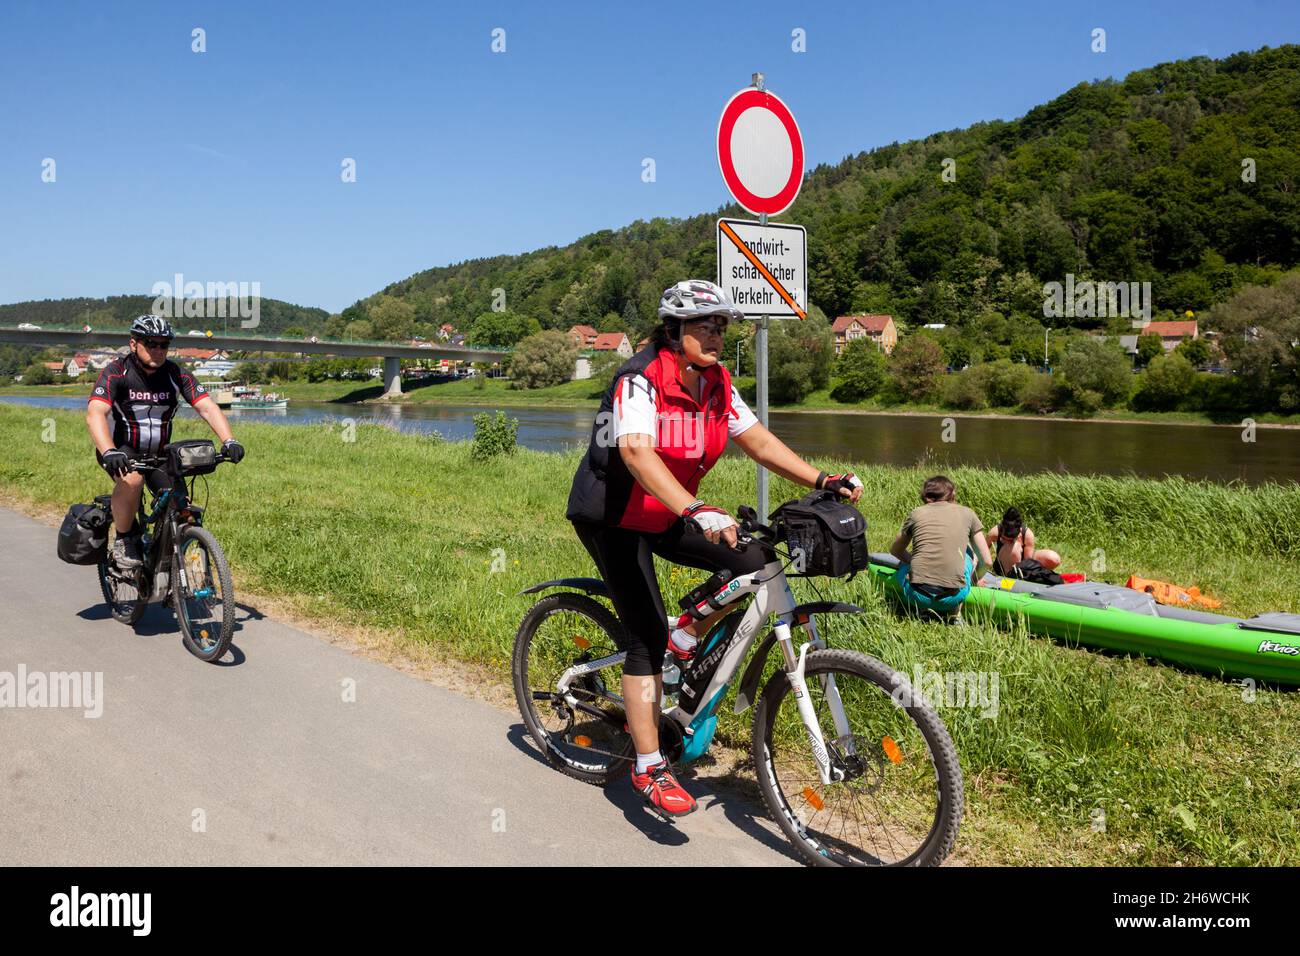 Cyclists on a bike path along the Elbe river, Saxony Germany Summer Healthy lifestyle Stock Photo